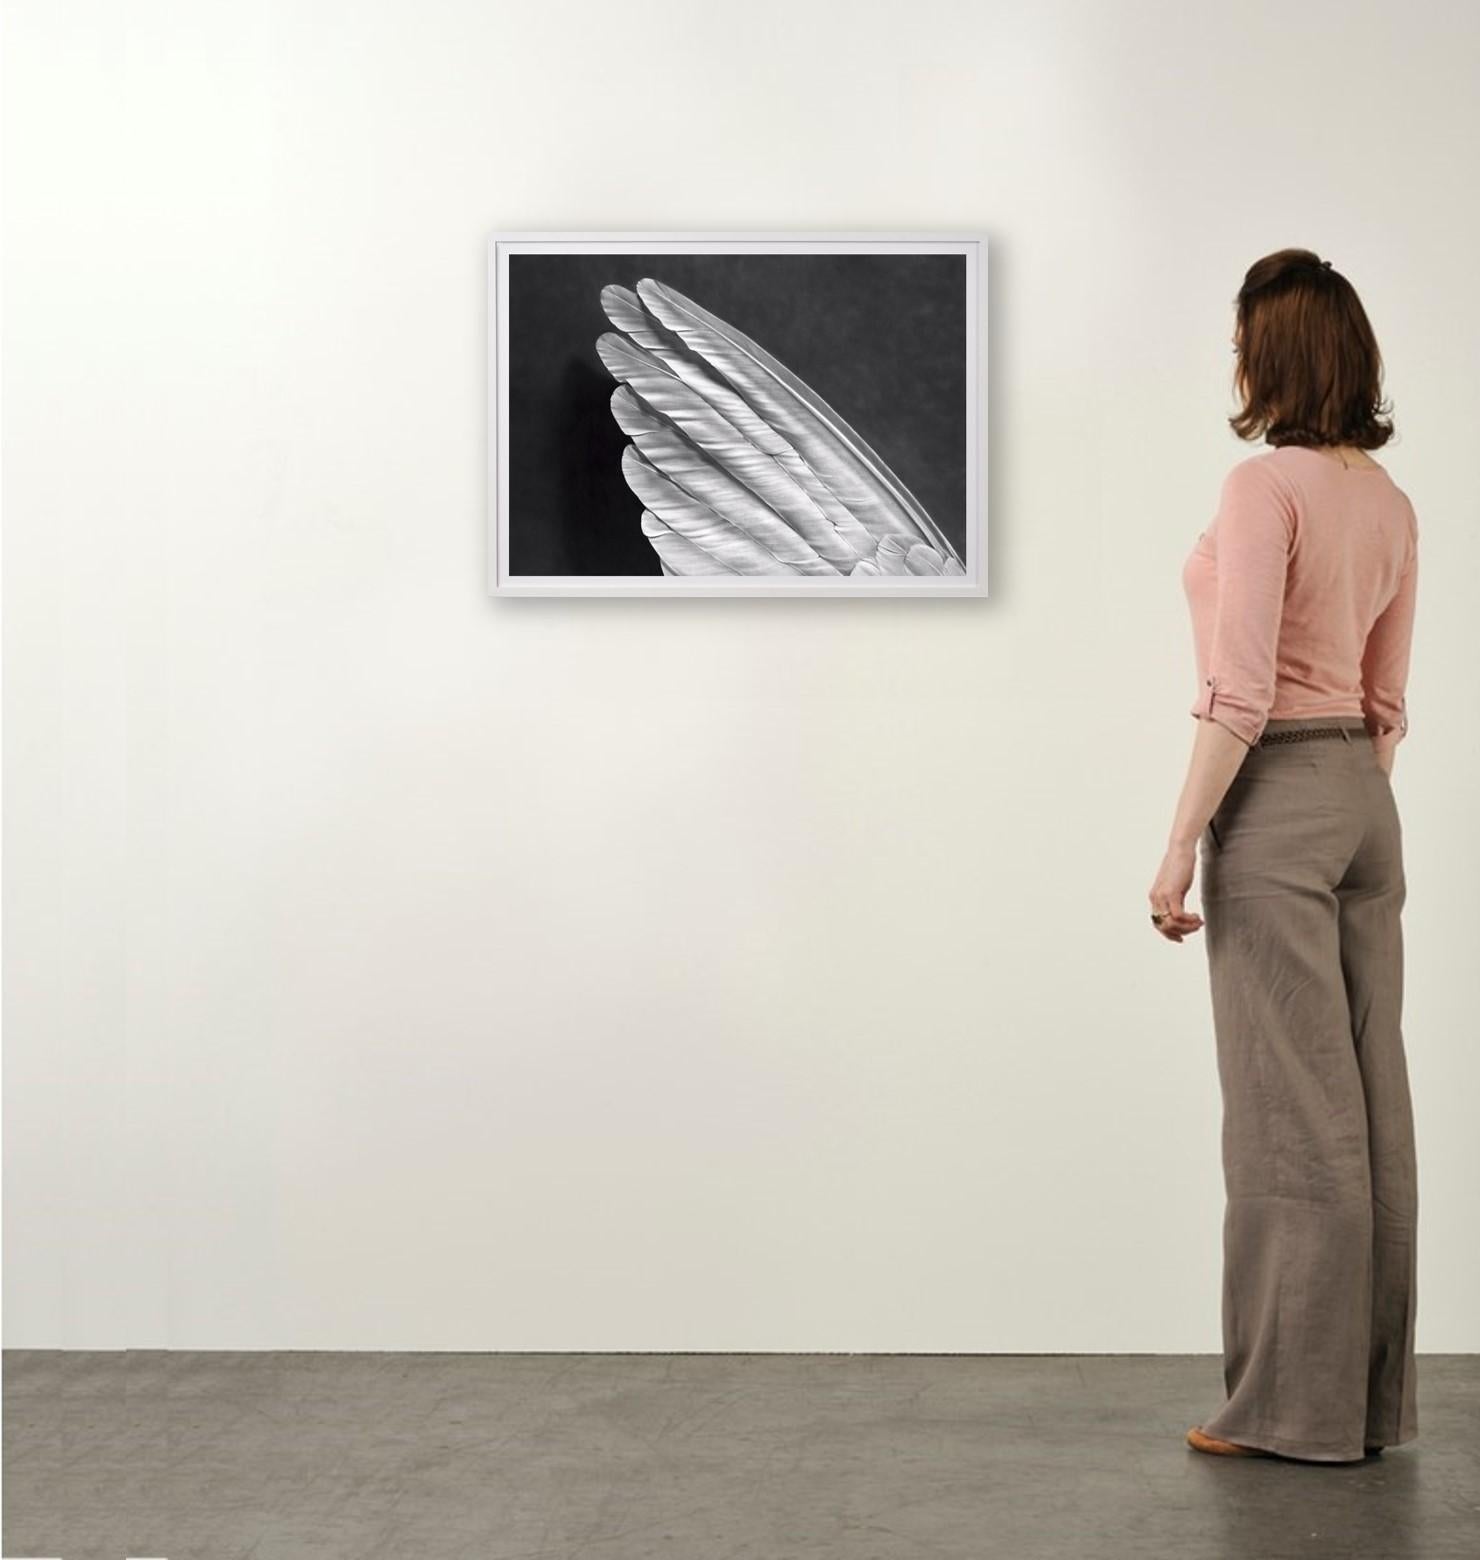 Robert Longo, Angel's Wing (Small Version),
Contemporary, 21st Century, Pigment Print, Limited Edition
Pigment print
Edition of 30
55,3 x 75,5 cm (21.7 x 29.7 in.)
Signed, accompanied by Certificate of Authenticity
In excellent condition, as